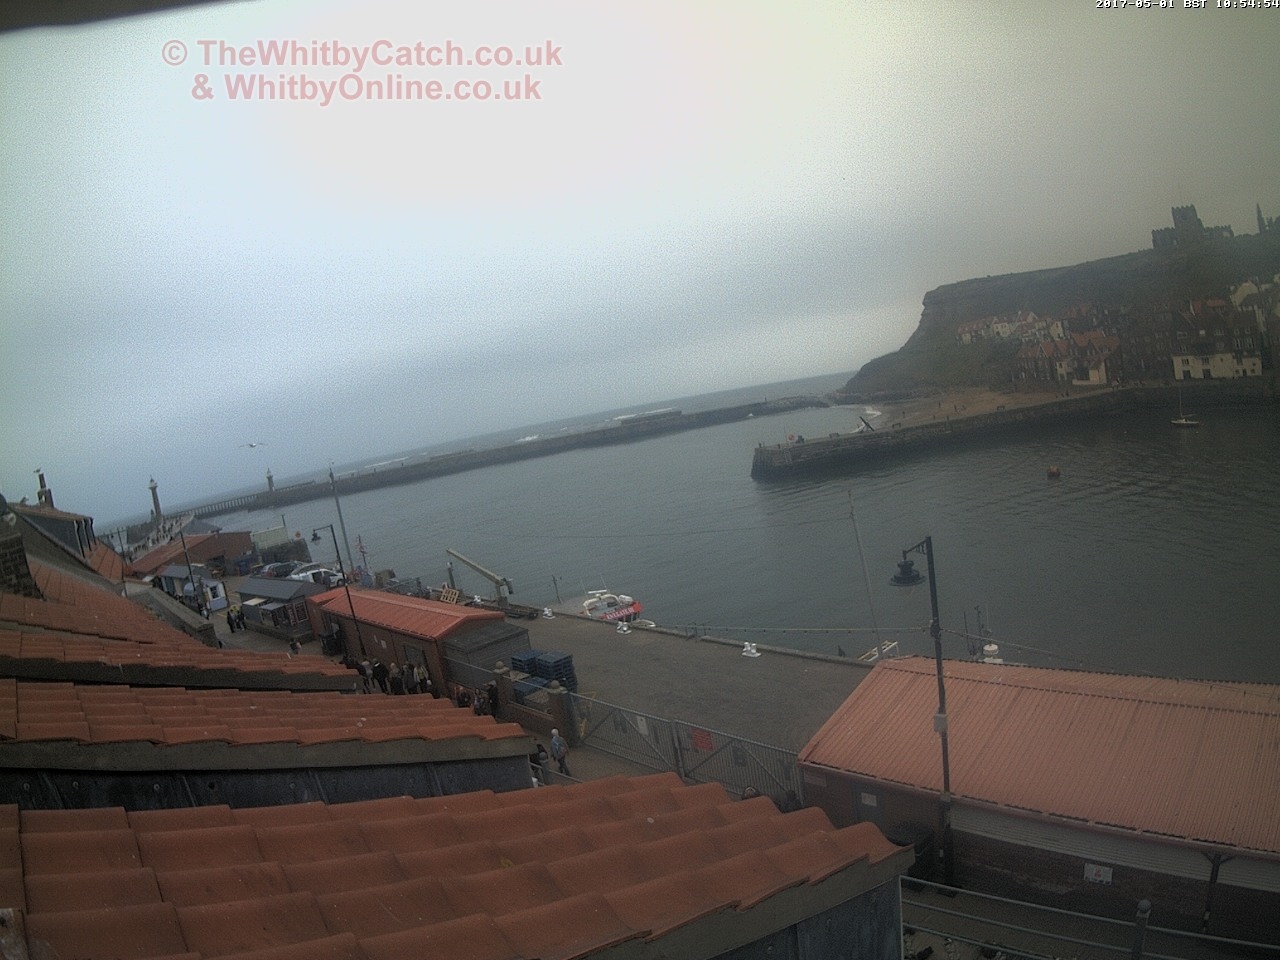 Whitby Mon 1st May 2017 10:55.